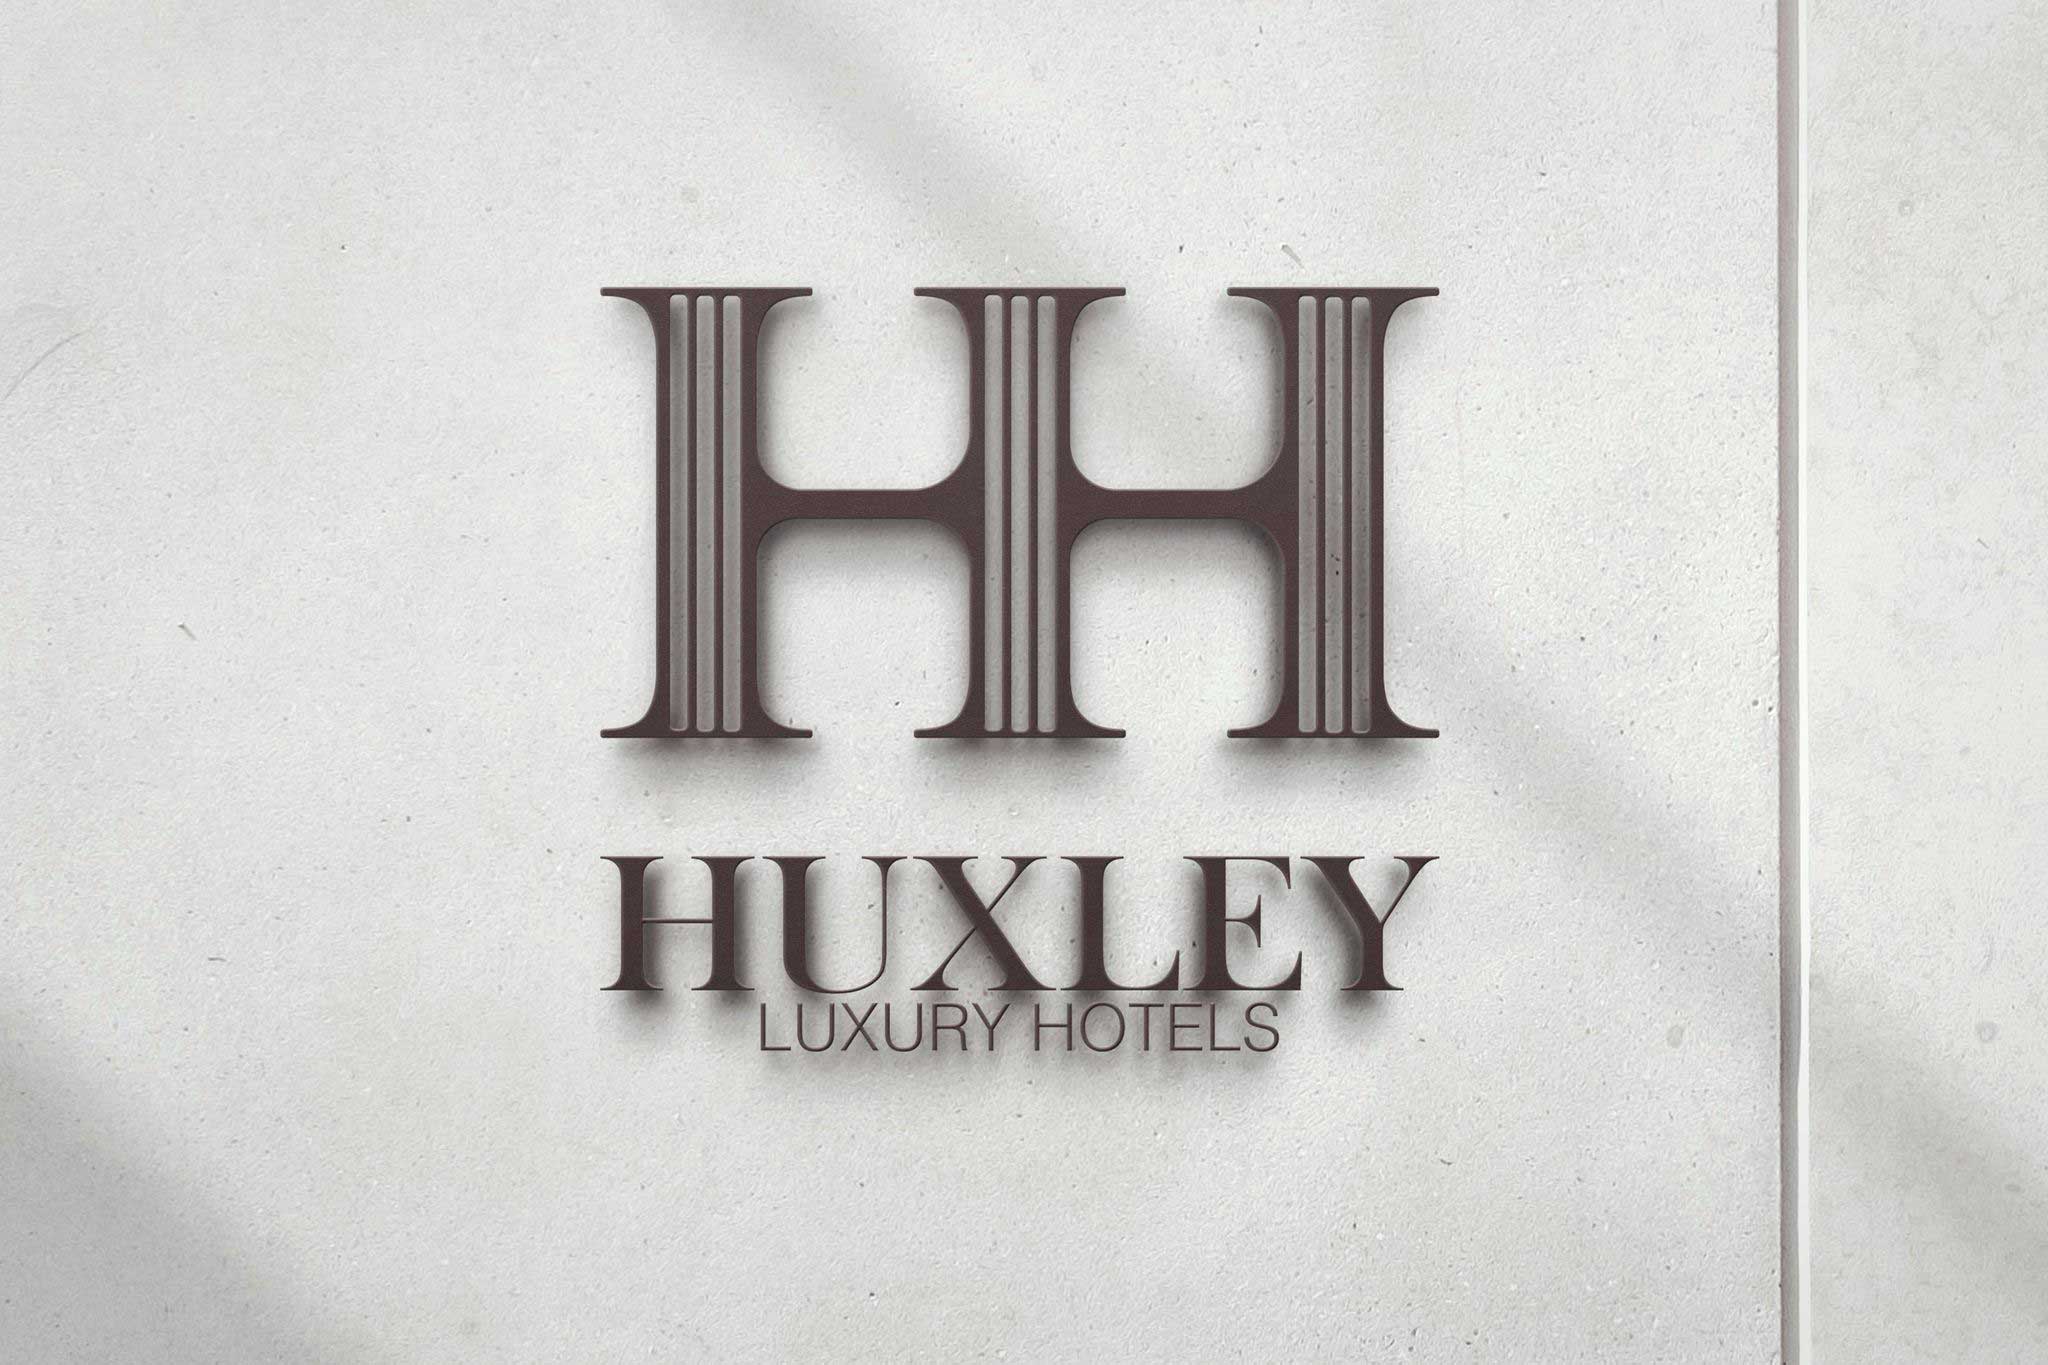 An application example of Huxley logo on an exterior wall